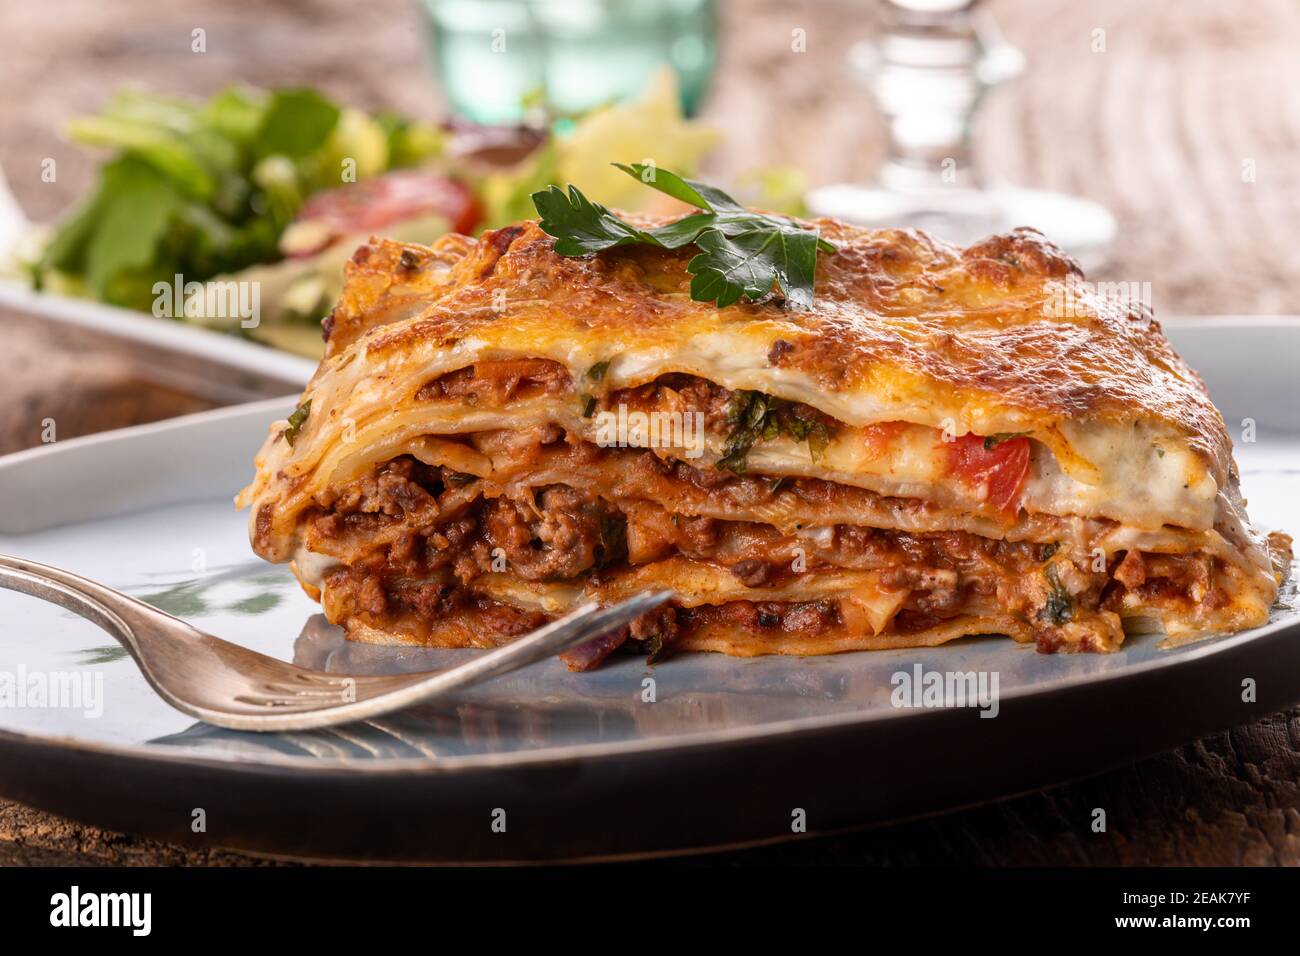 portion of lasagna on a plate Stock Photo